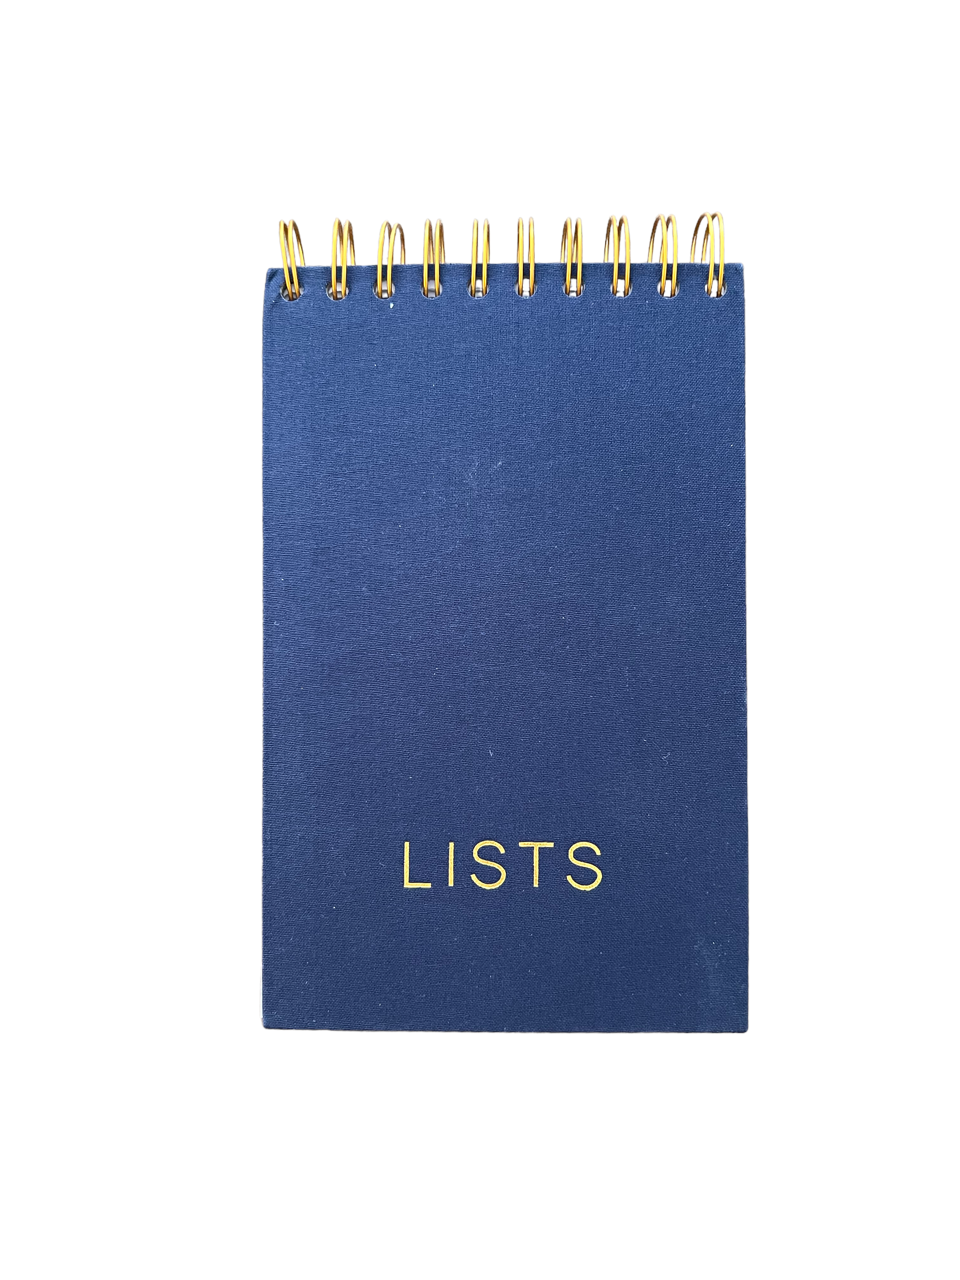 LISTS Spiral Notepad with gold accents, by Do Good Paper Co.